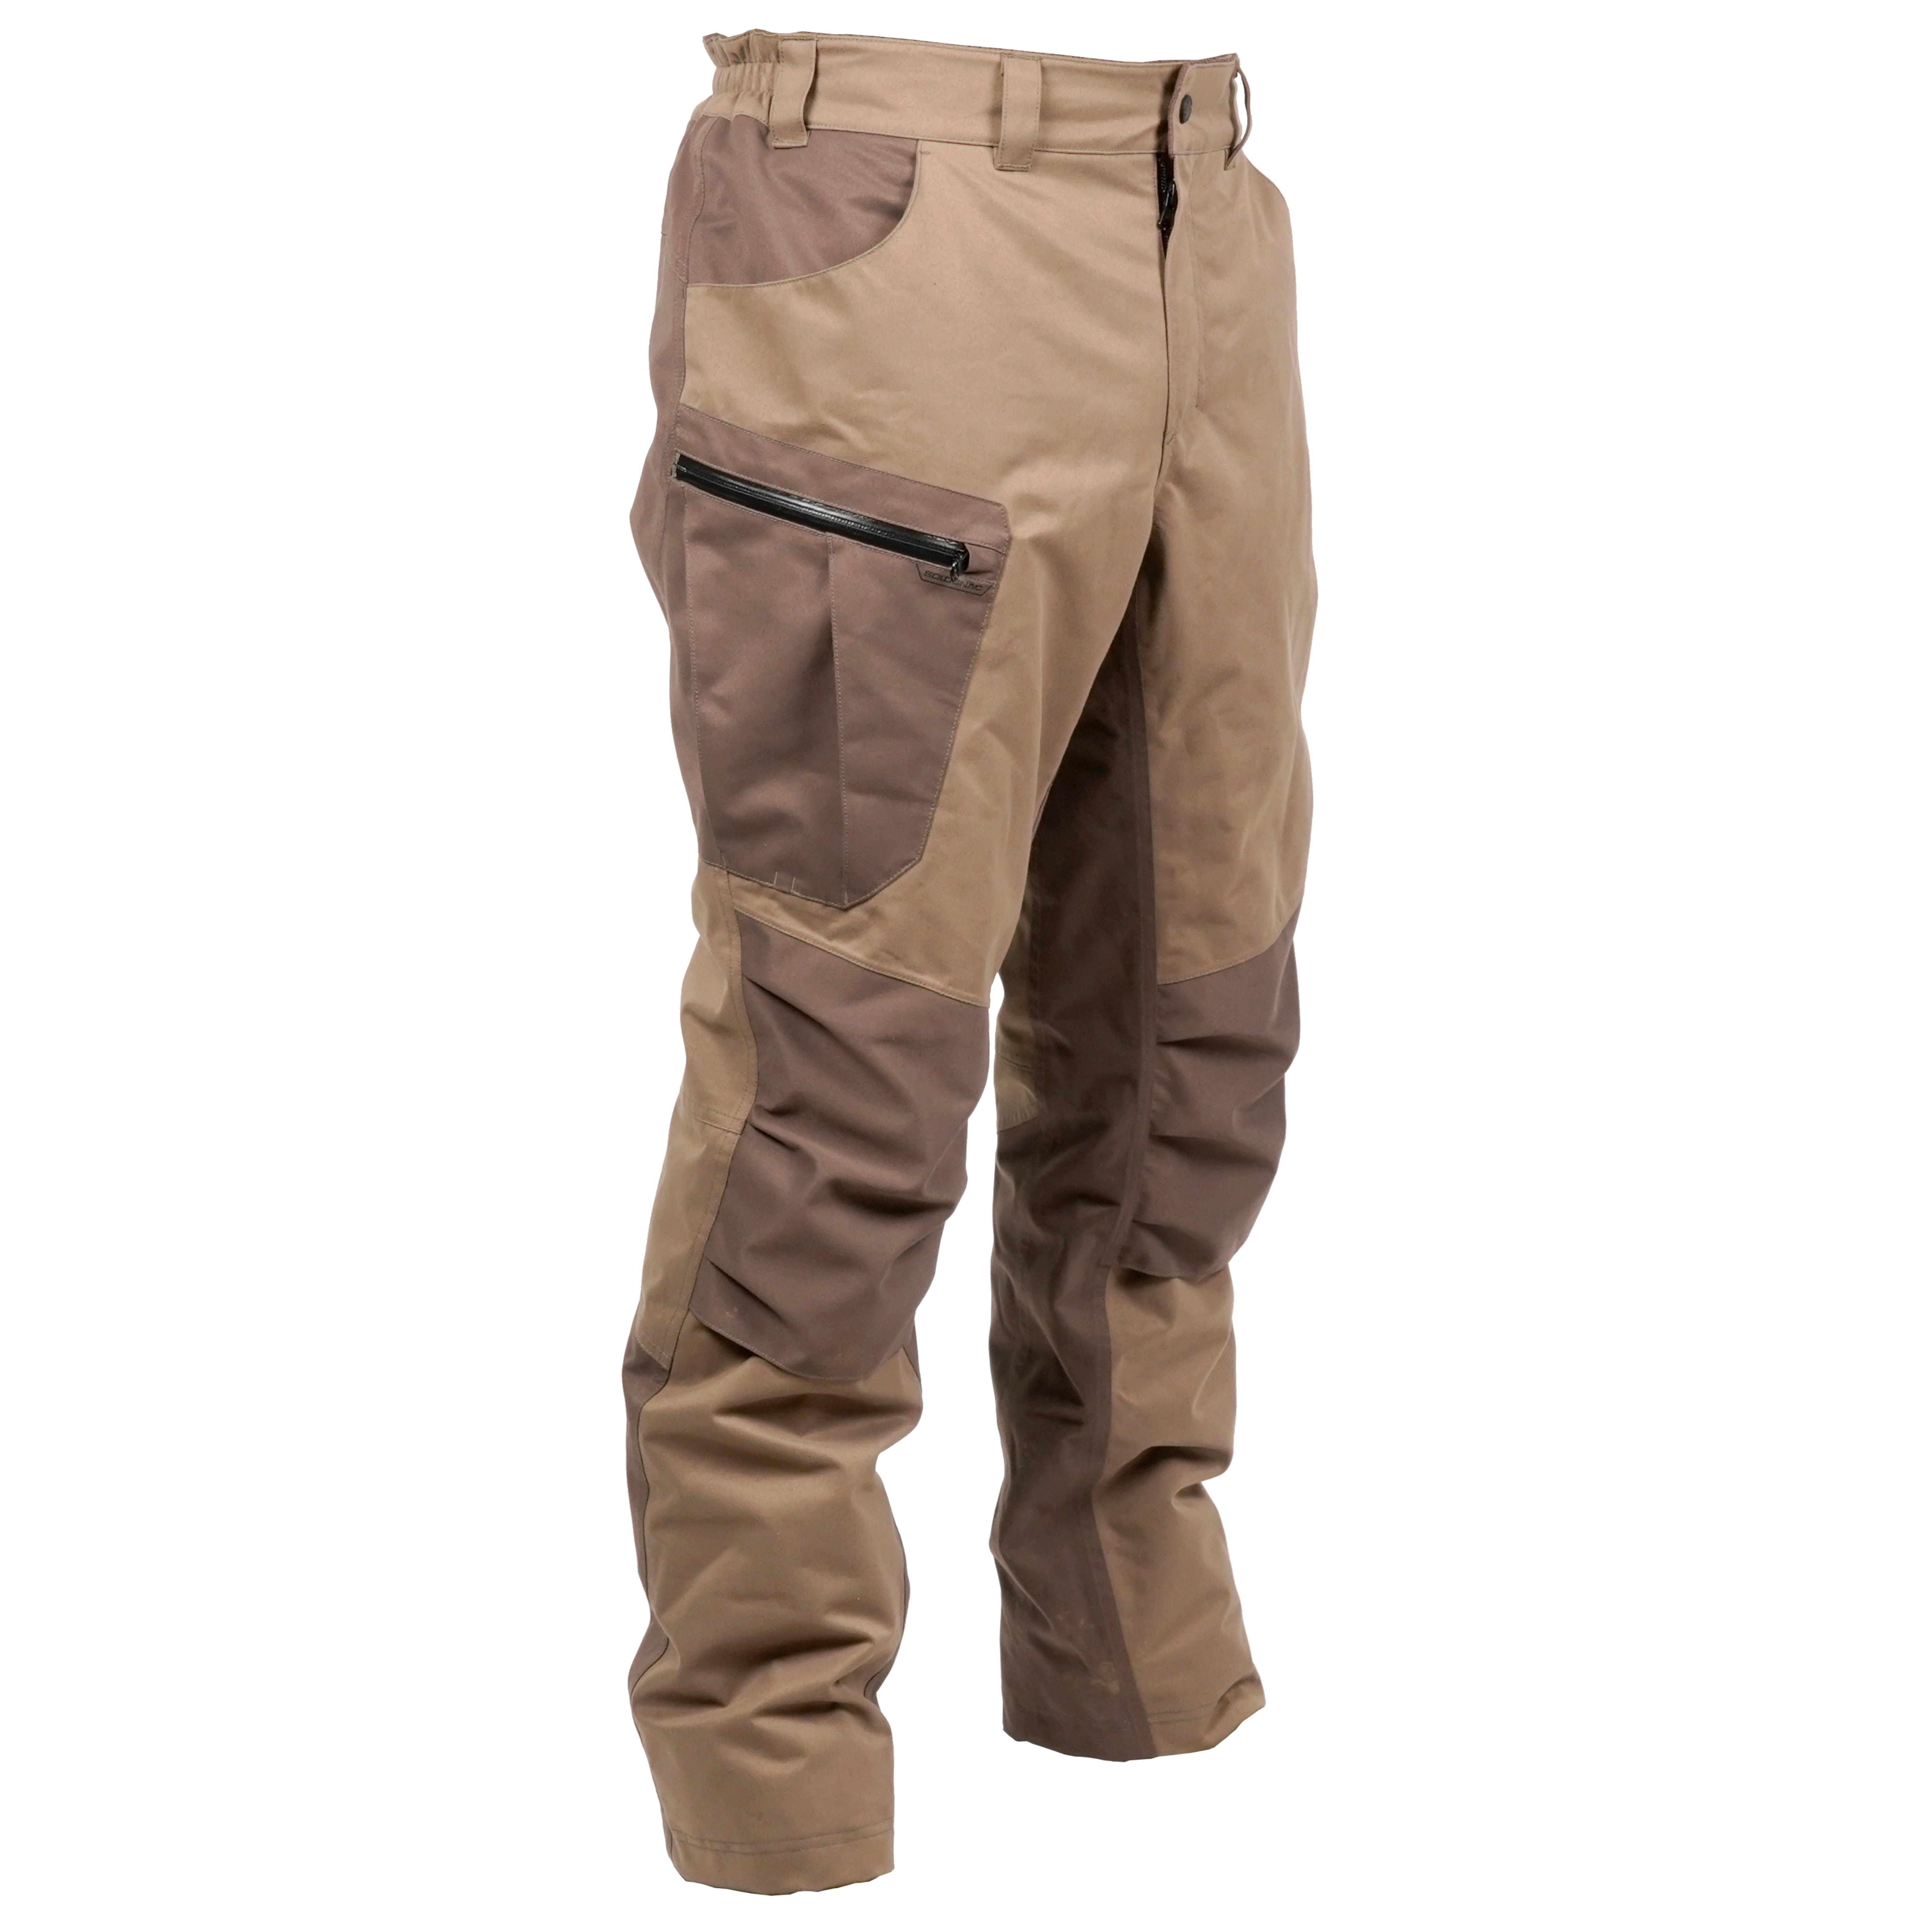 Mens Country Sport Lightweight Breathable Trousers  500 Beige  Decathlon